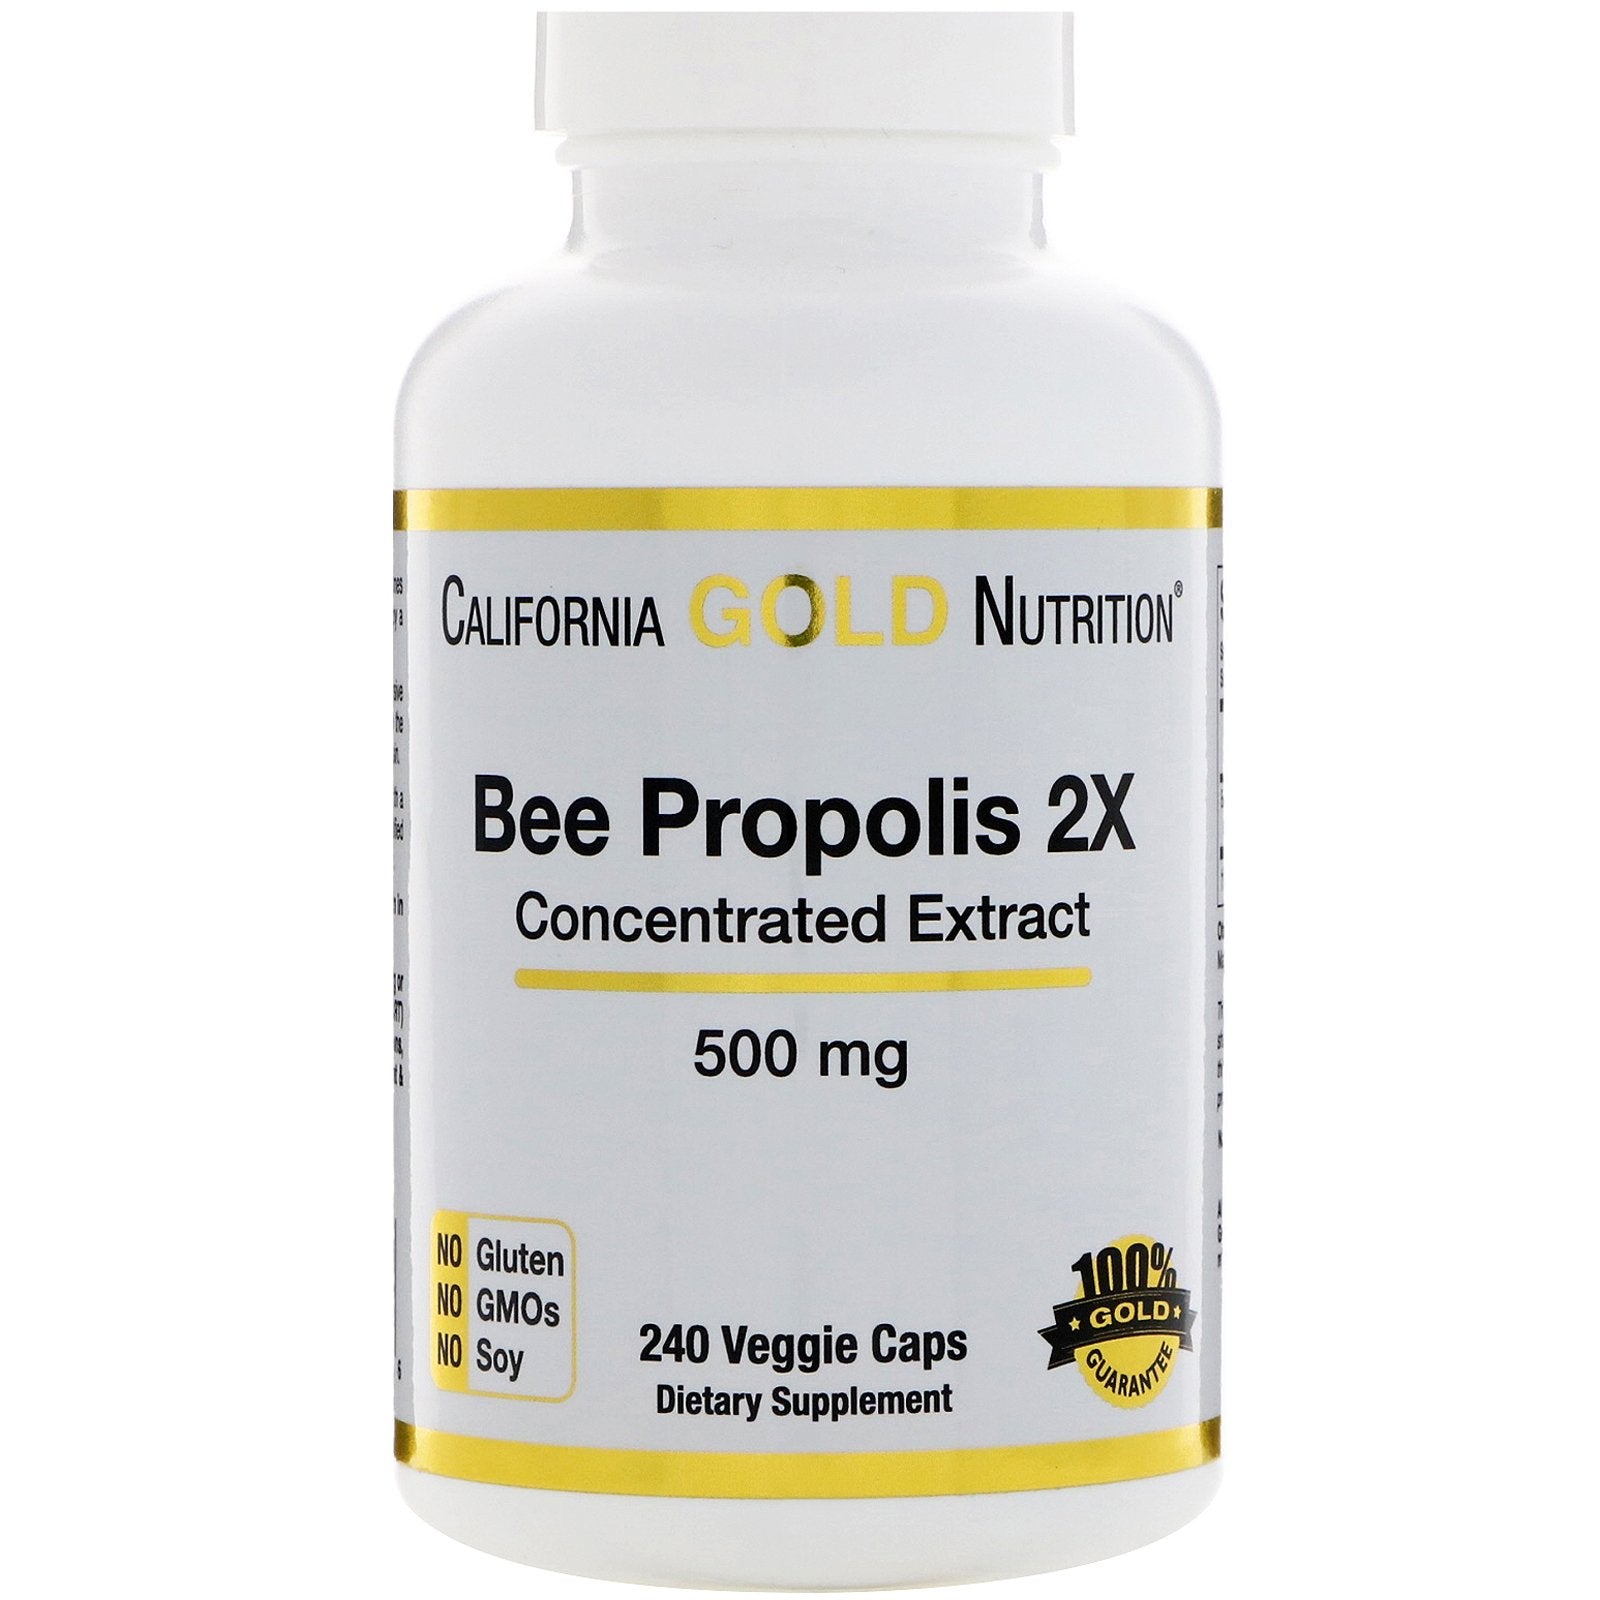 California Gold Nutrition, Bee Propolis 2X, Concentrated Extract, 500 mg, 240 Veggie Caps